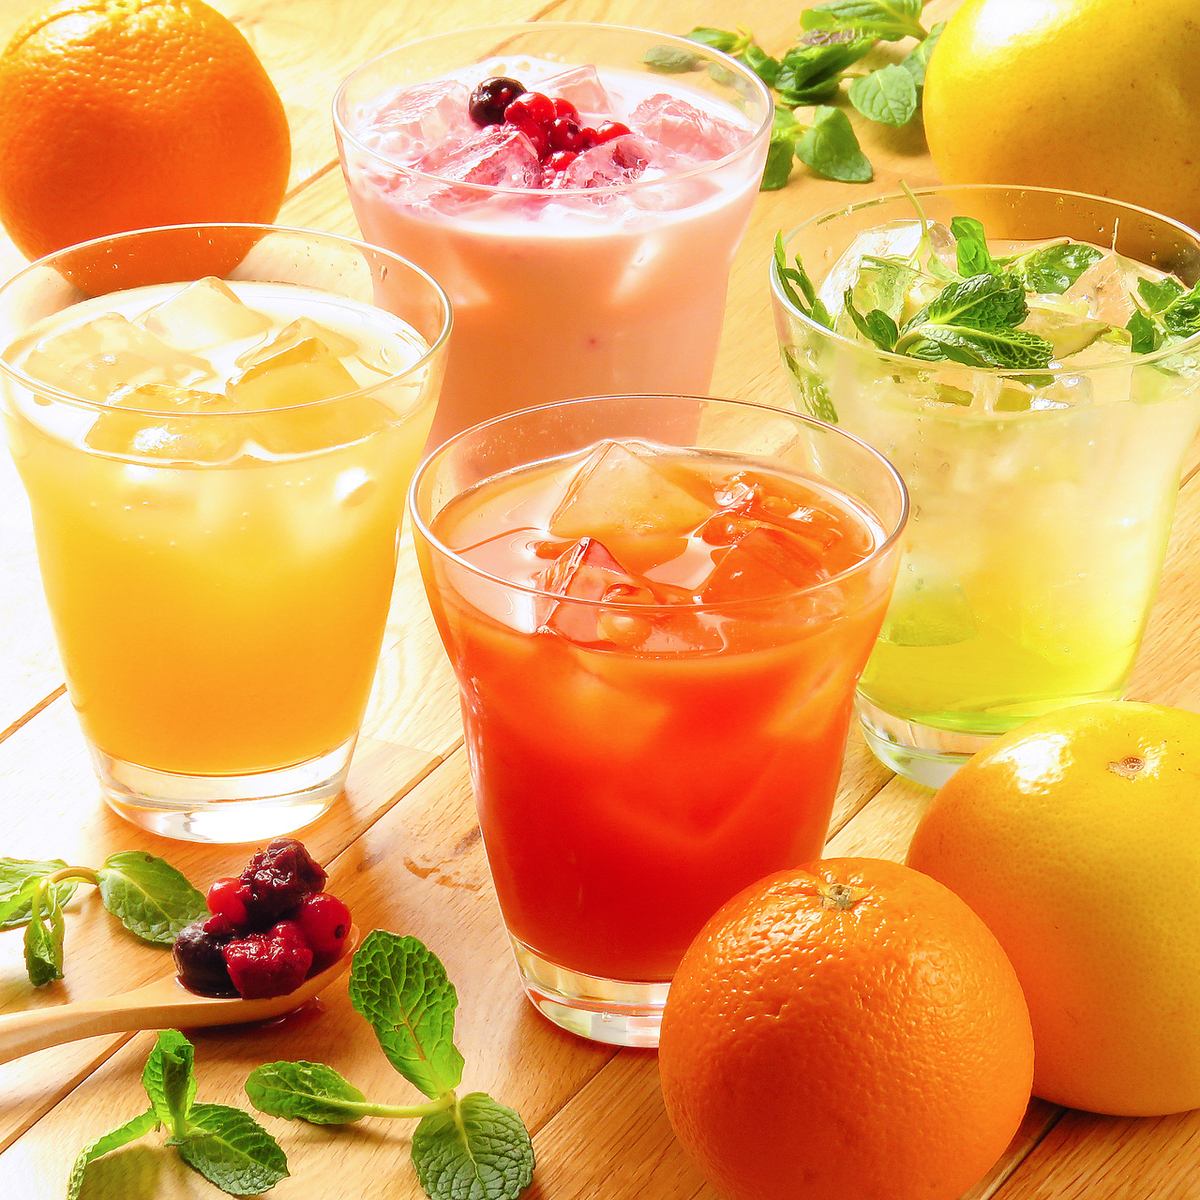 There are also plenty of "non-alcoholic cocktails" that are sure to delight women♪ Each starts at 490 JPY (excl. tax)